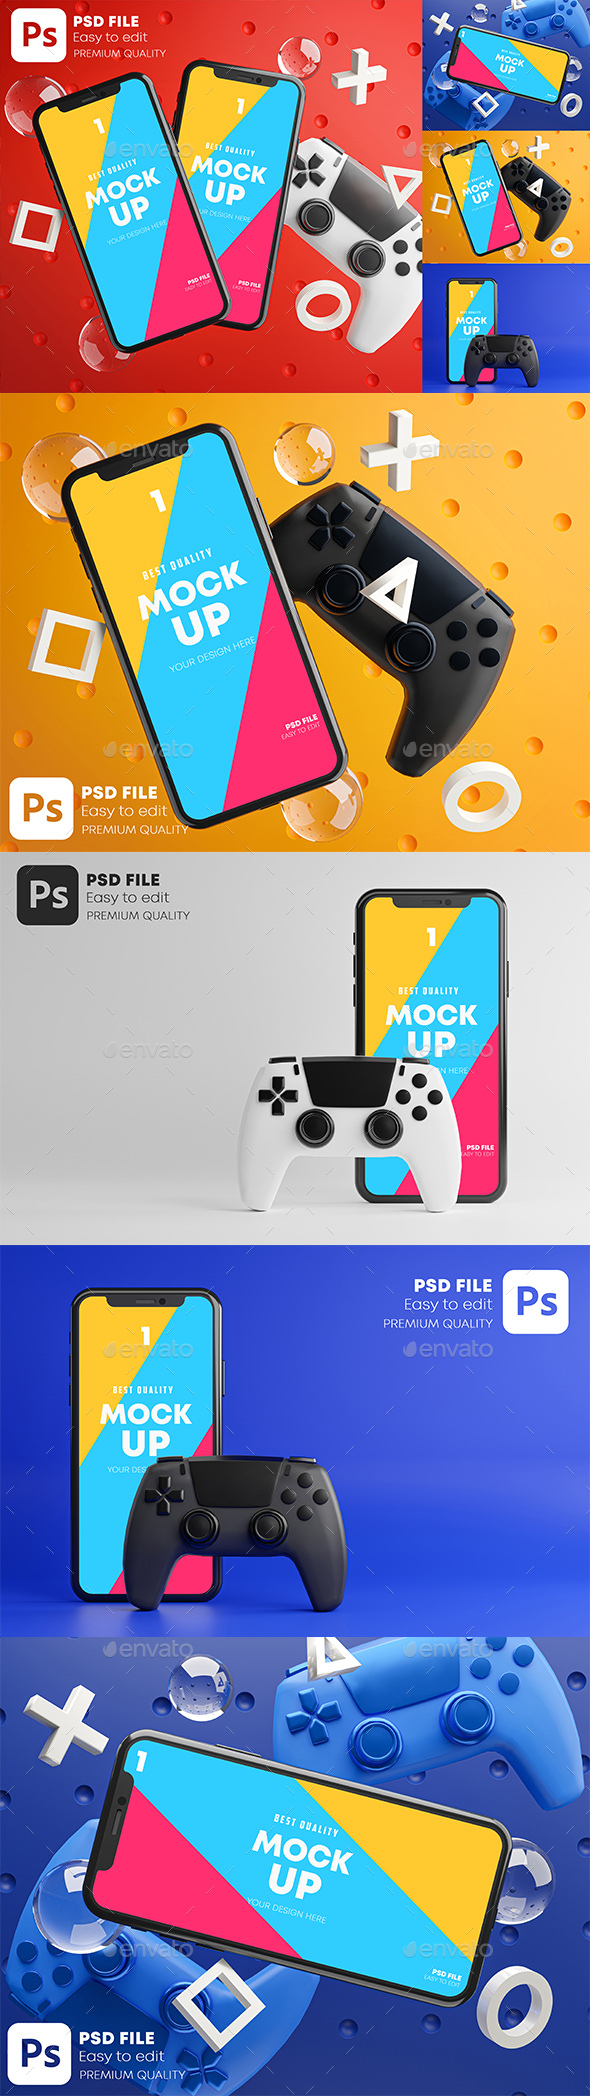 Download Gamepad Mockup Graphics Vectors From Graphicriver